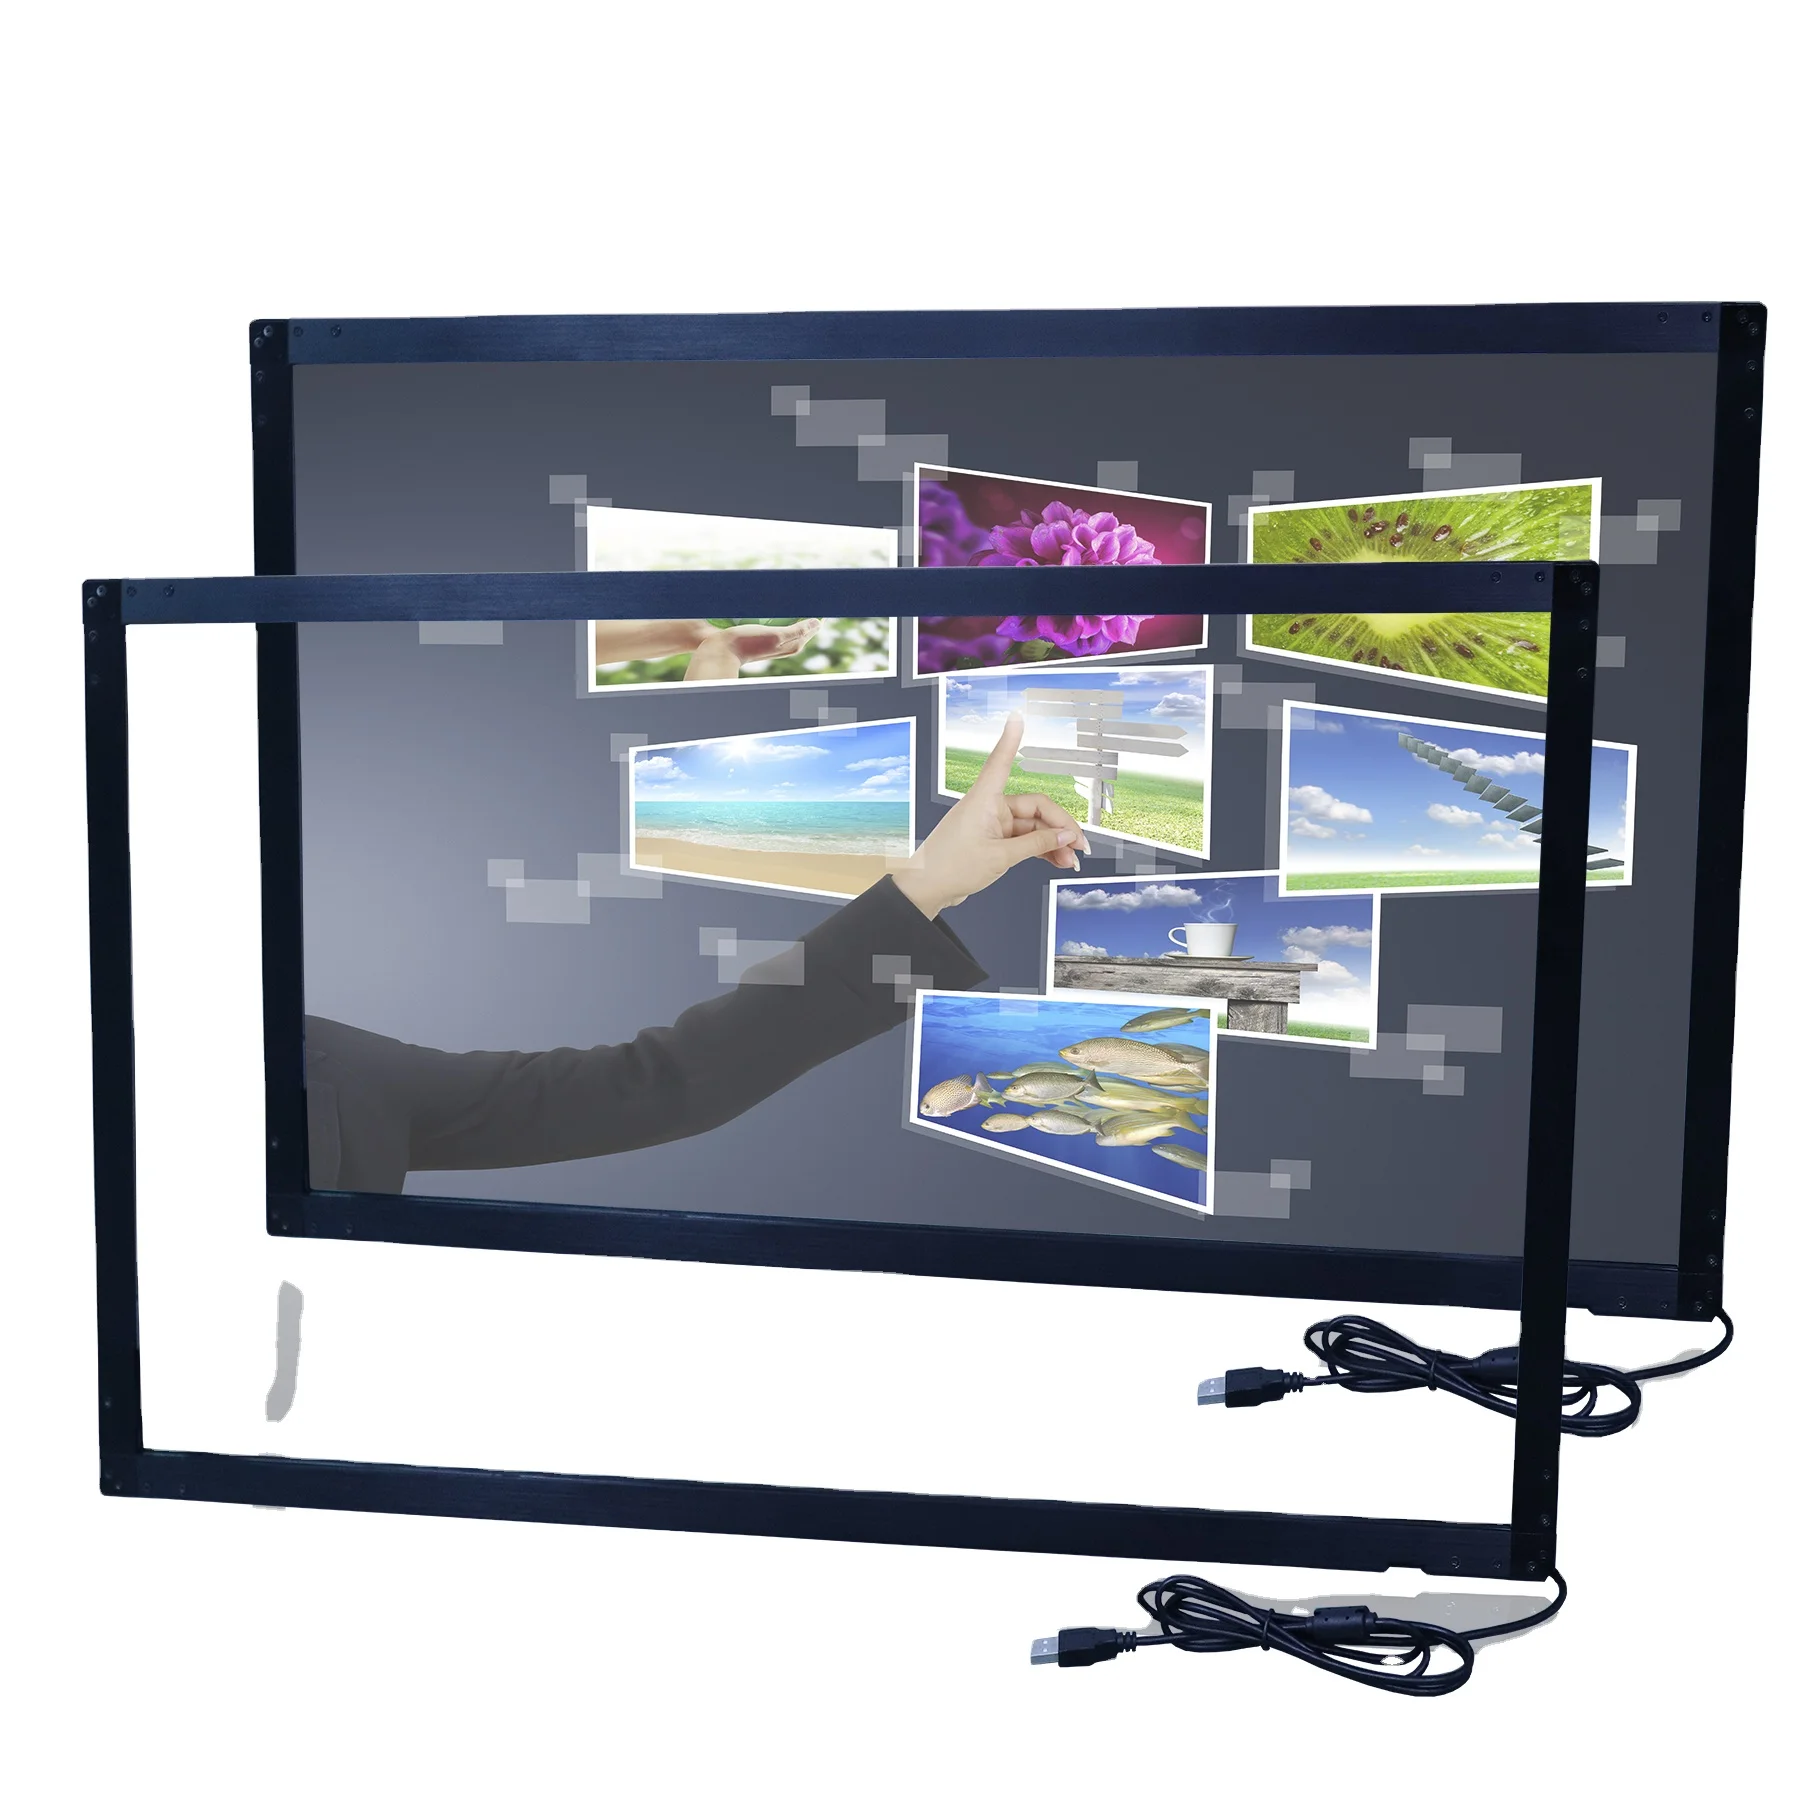 

High quality made in china  multi-point infrared USB touch frame large IR touch screen panel overlay kit, Black